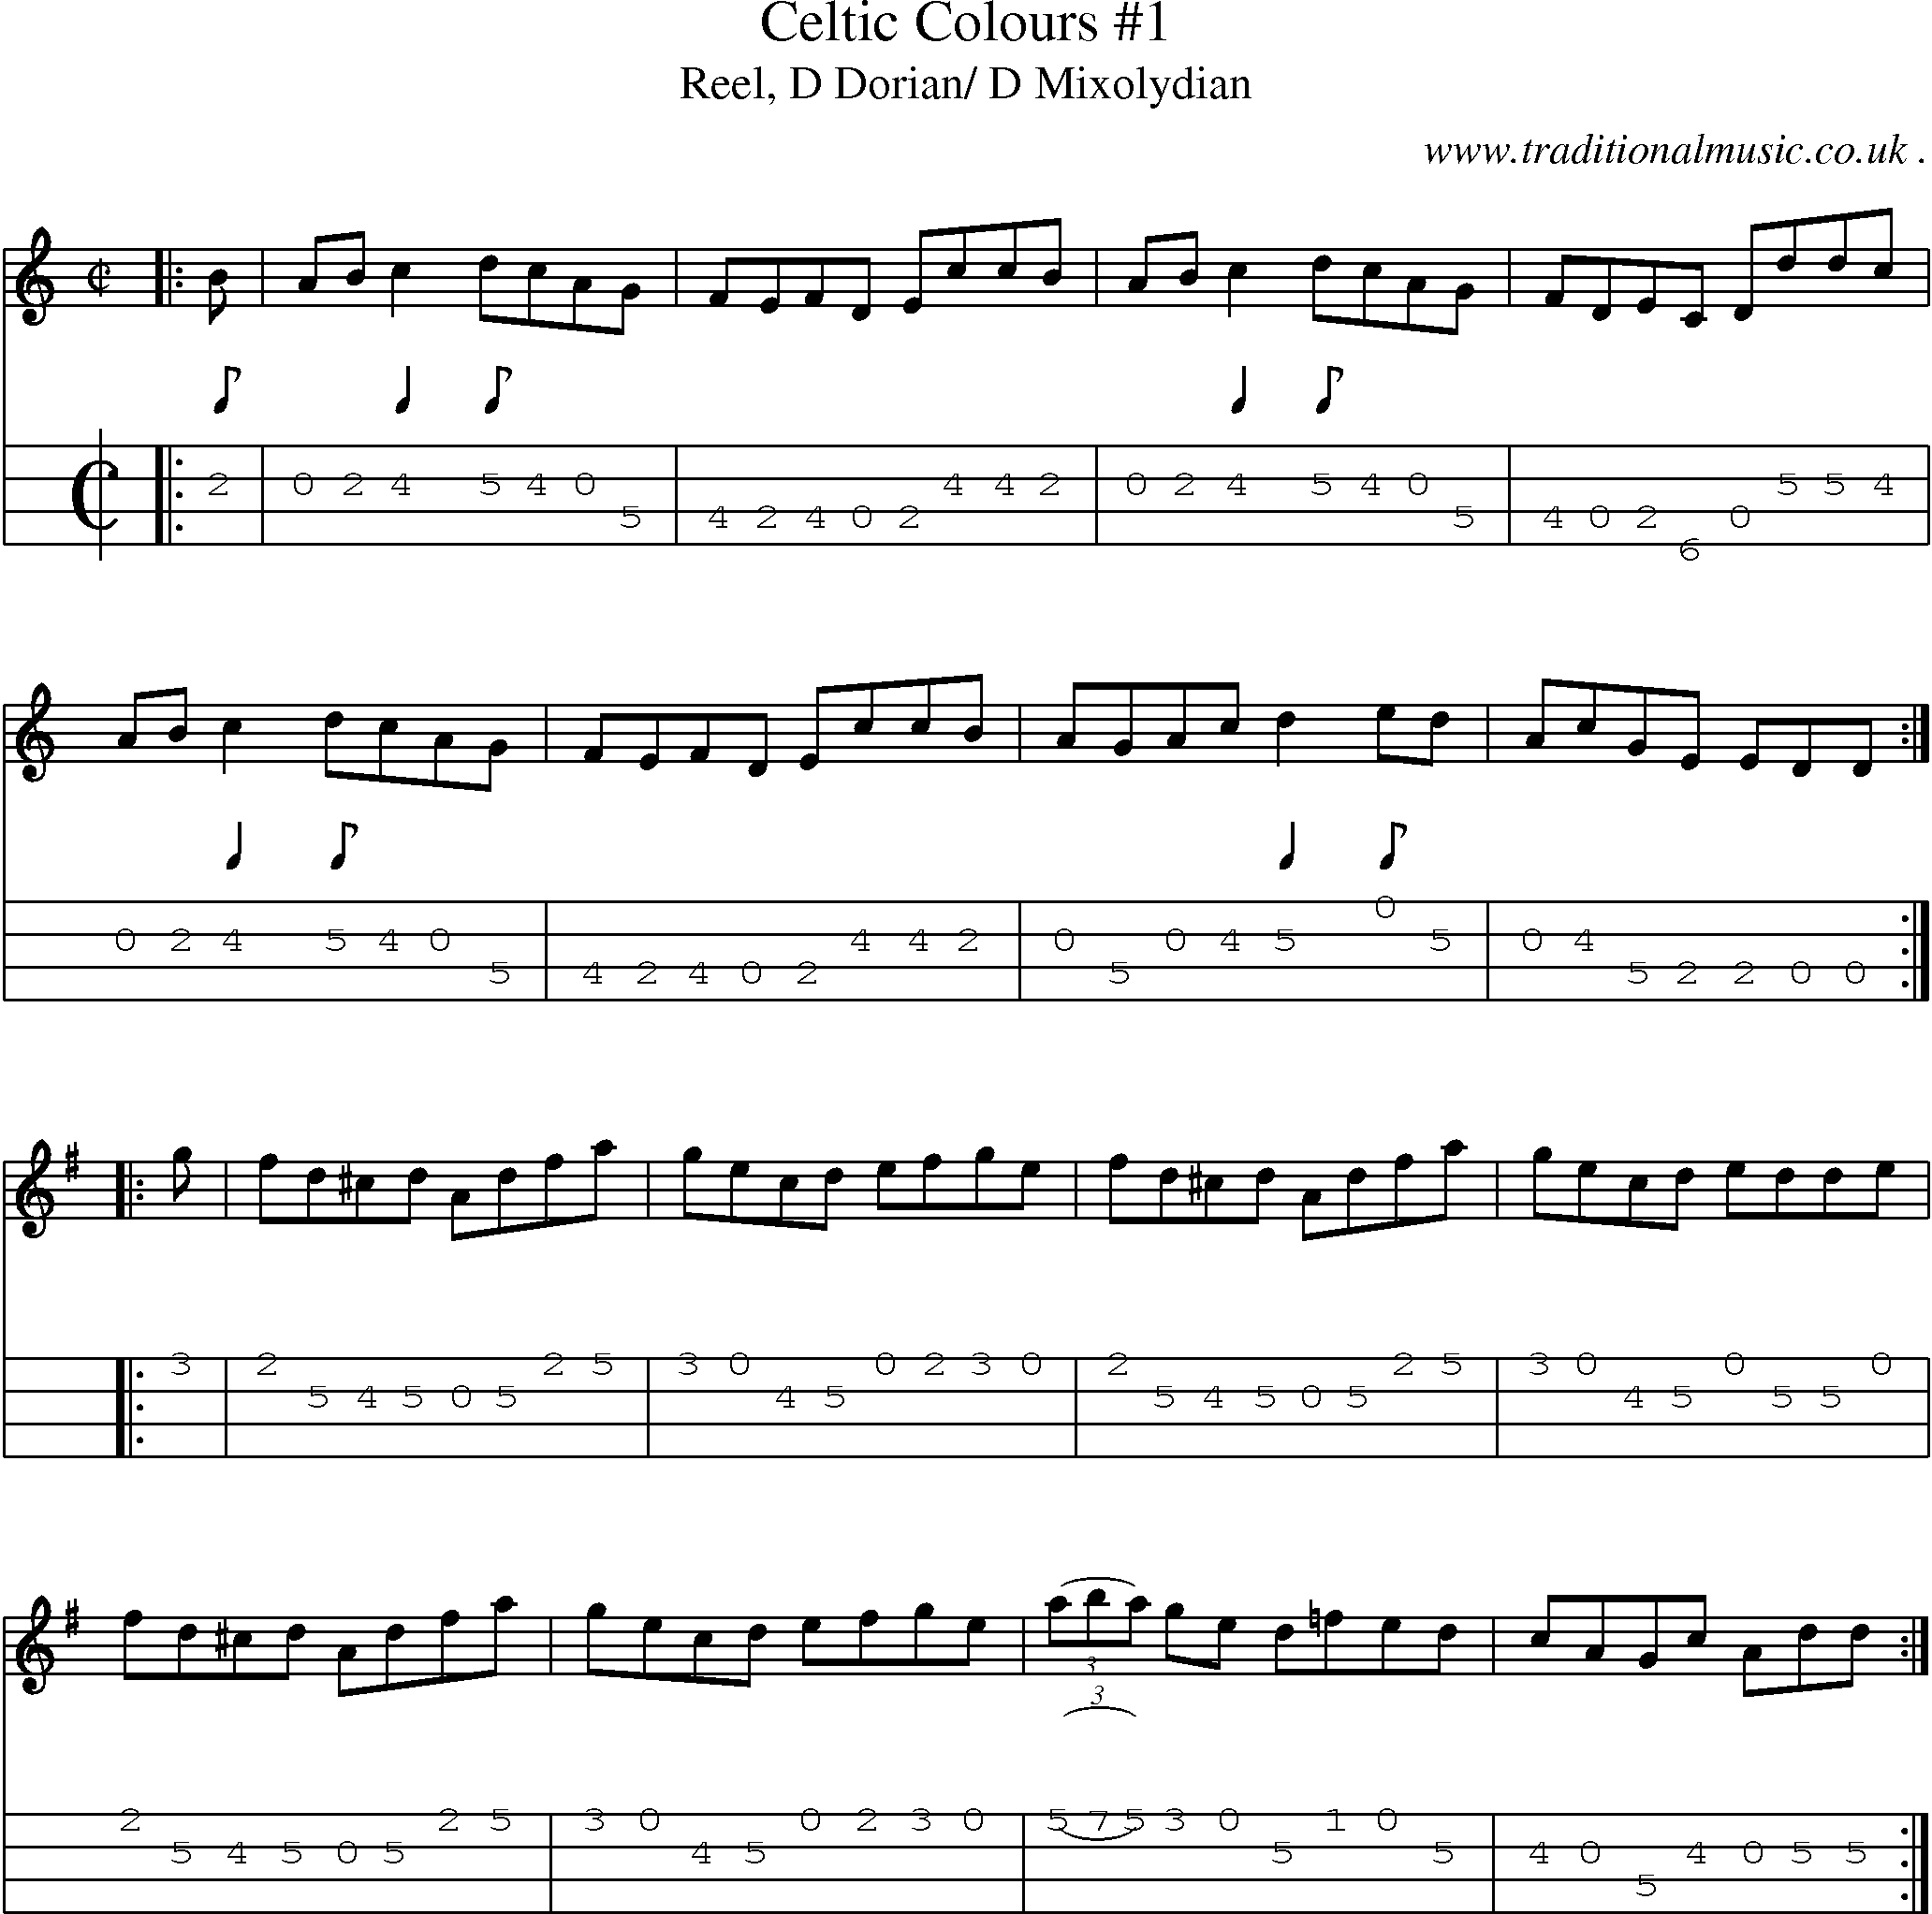 Sheet-music  score, Chords and Mandolin Tabs for Celtic Colours 1